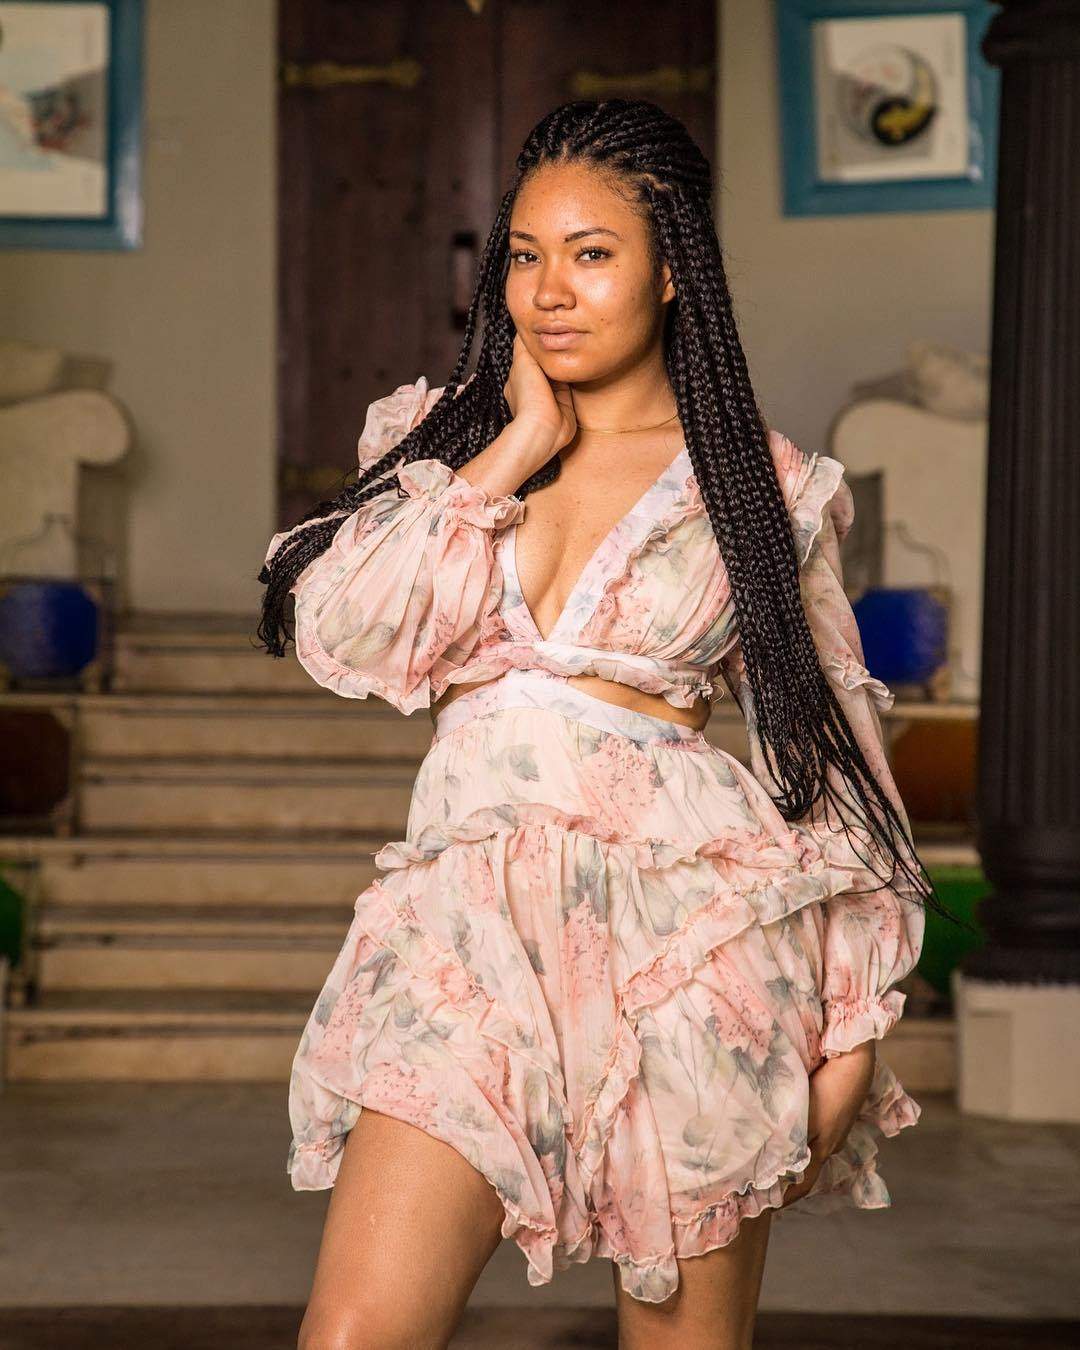 'I'll choose love over and over' - Anna Banner says as she shares delectable photos